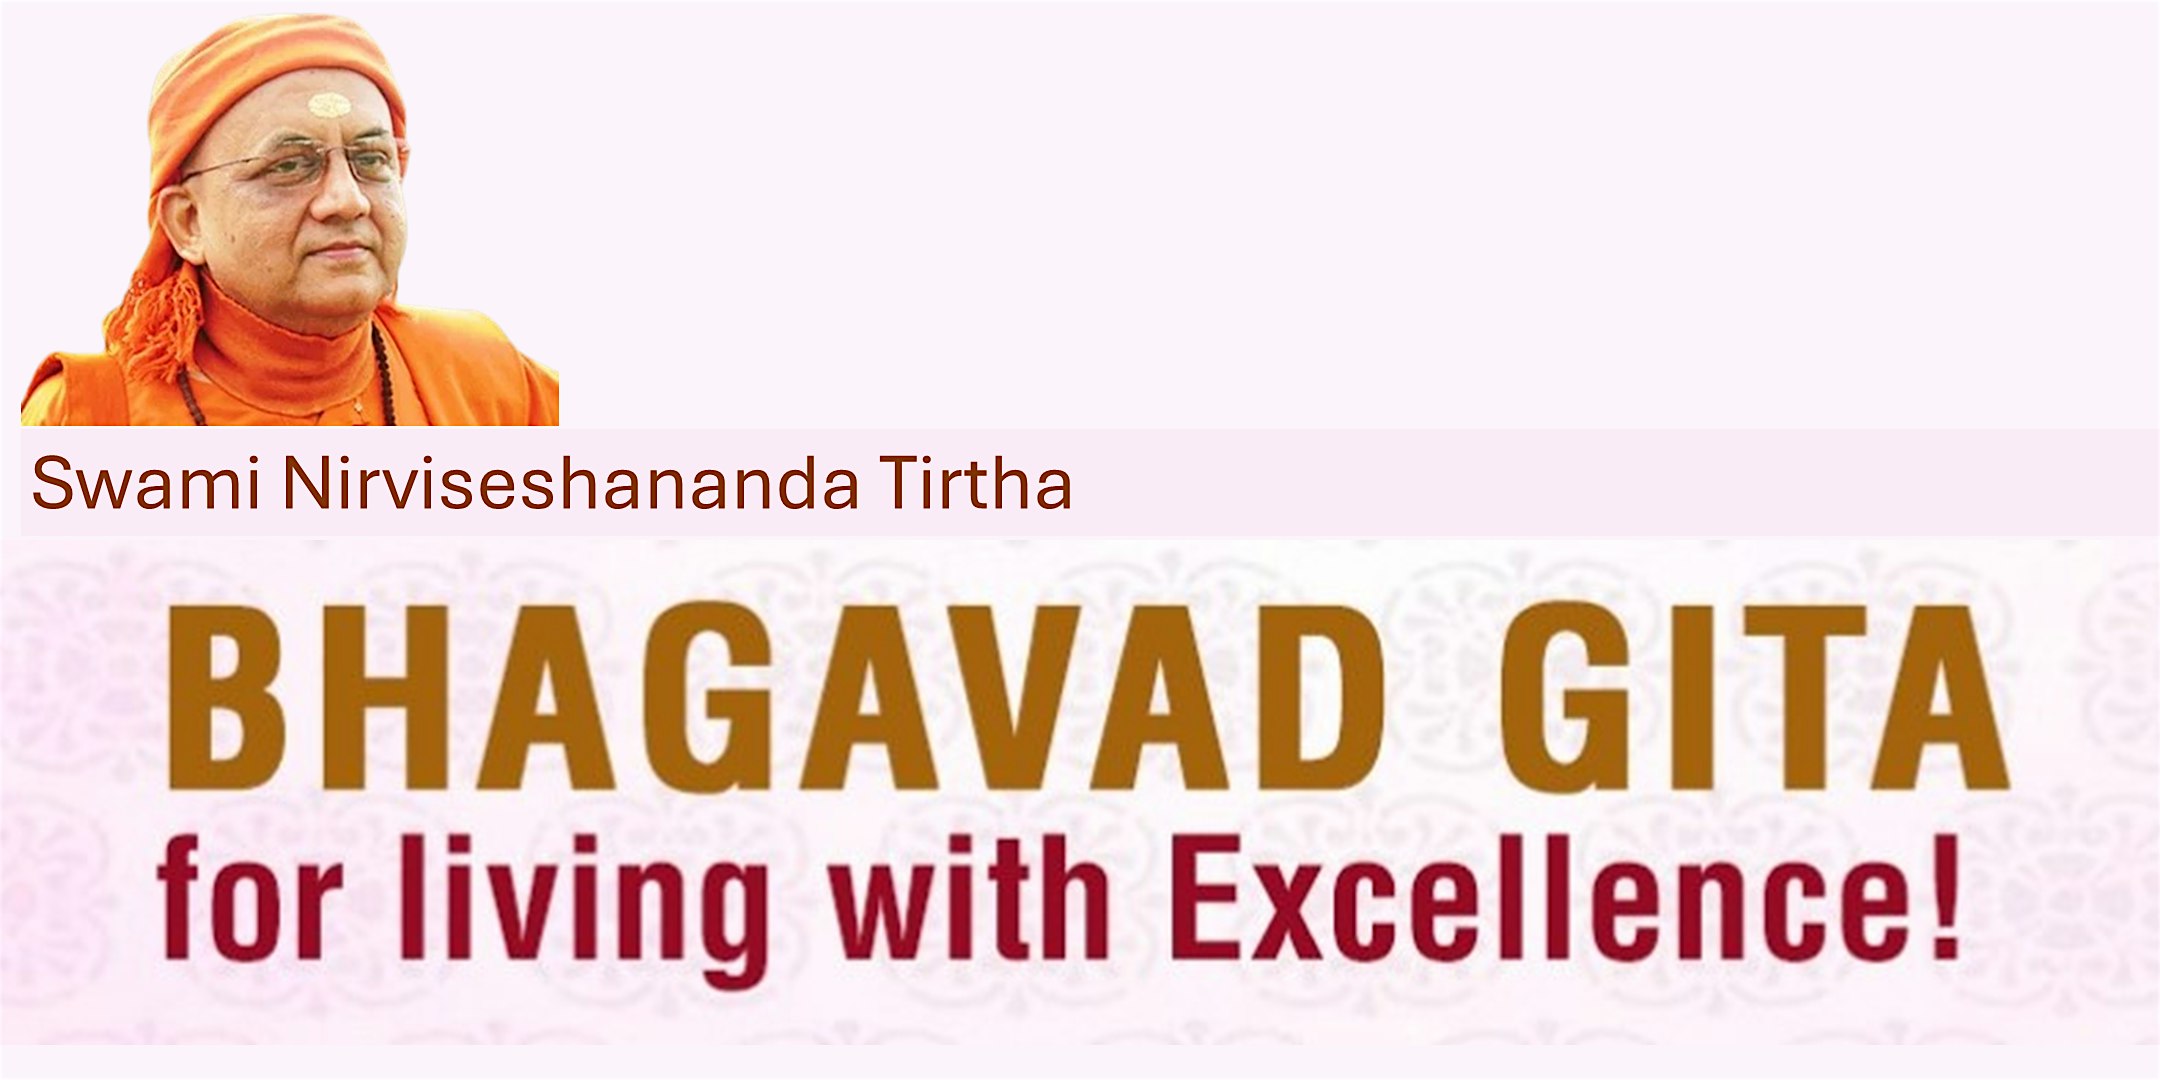 Bhagavad Gita for Living  with Excellence